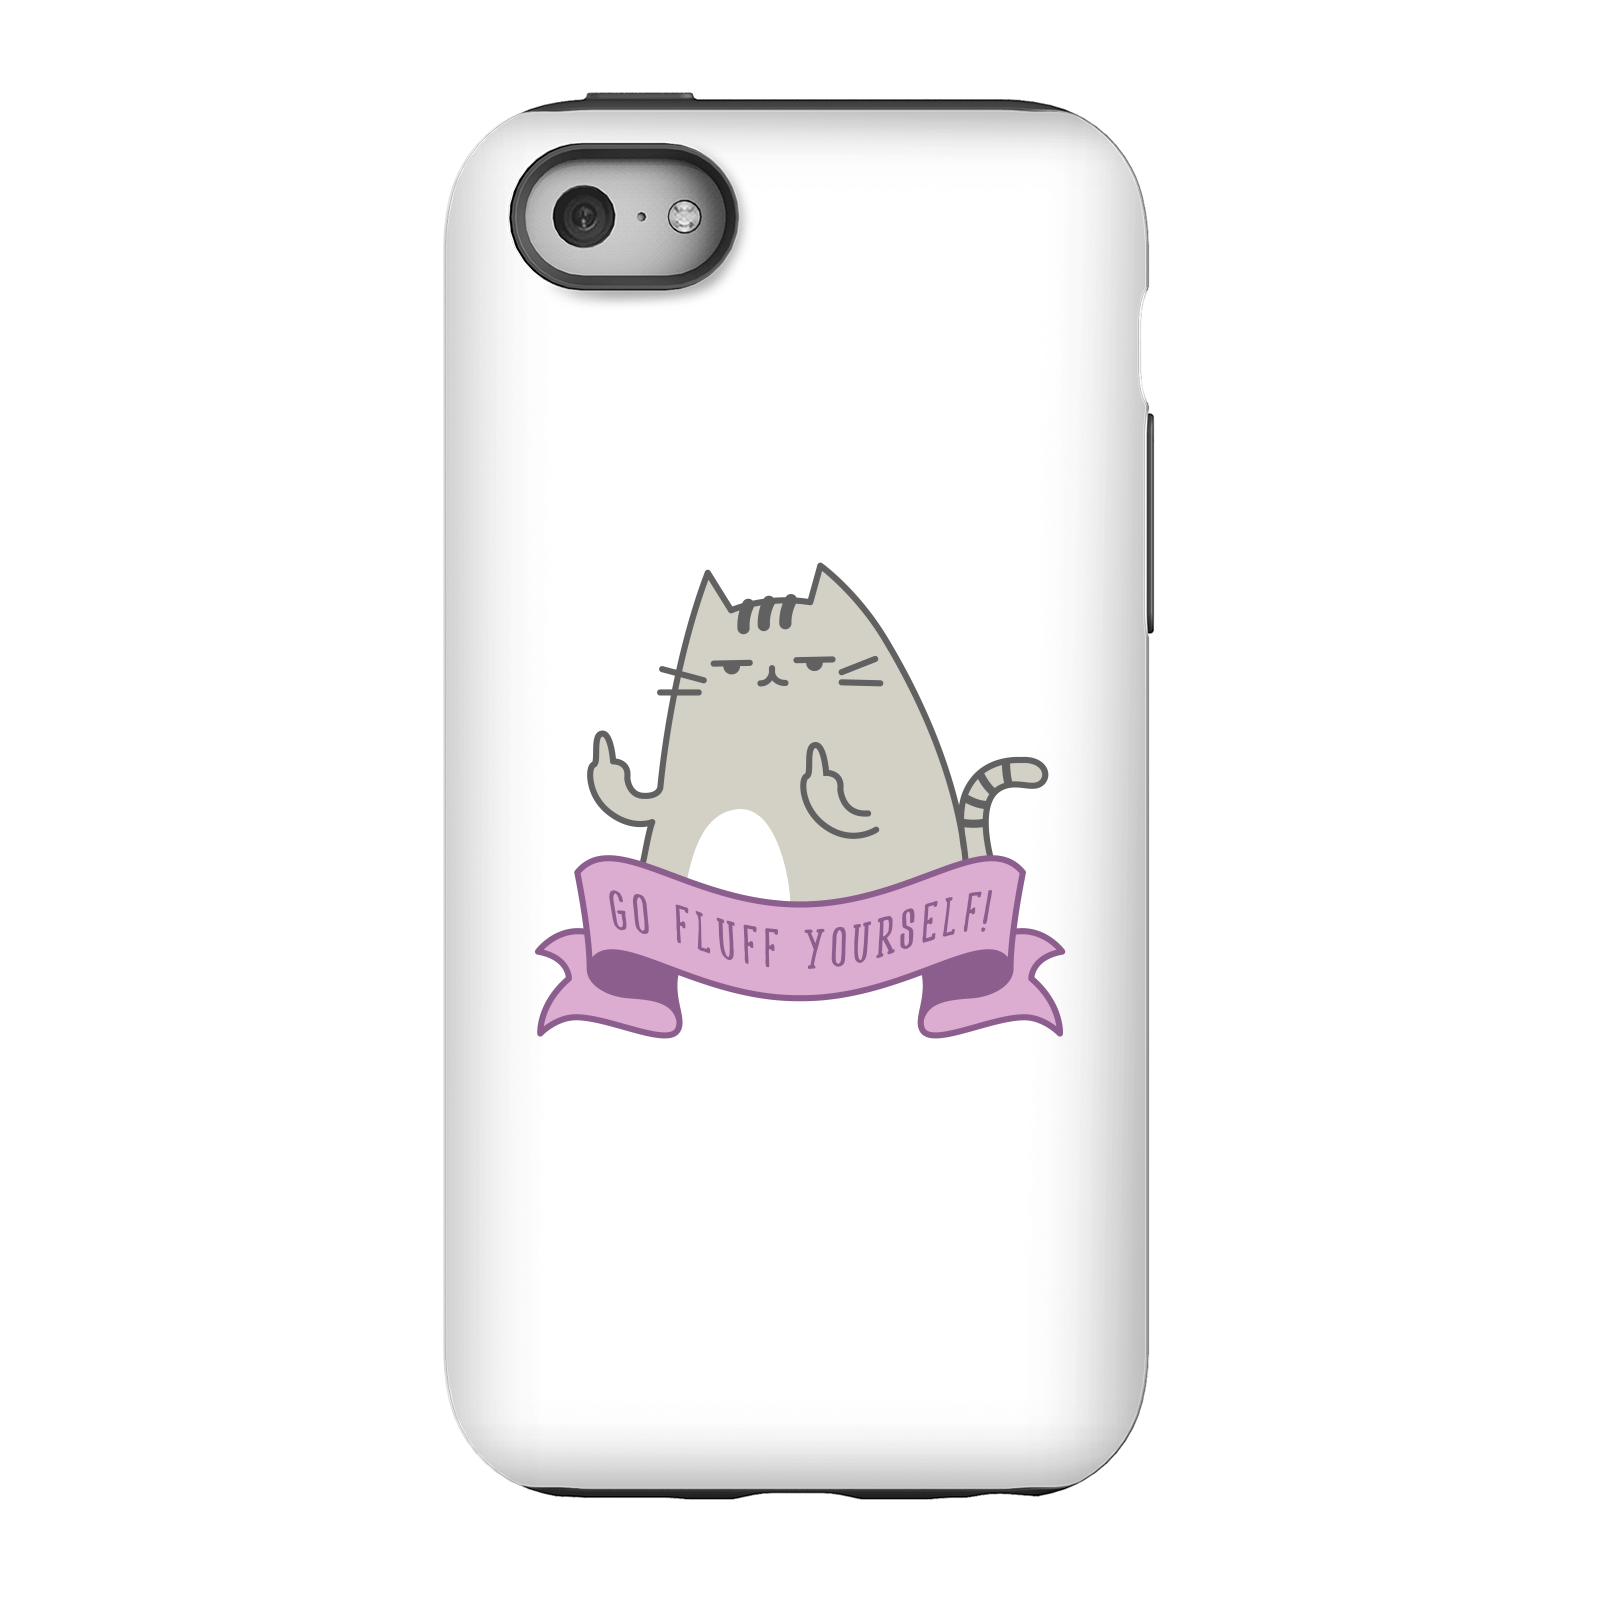 Go Fluff Yourself! Phone Case for iPhone and Android - iPhone 5C - Tough Case - Matte